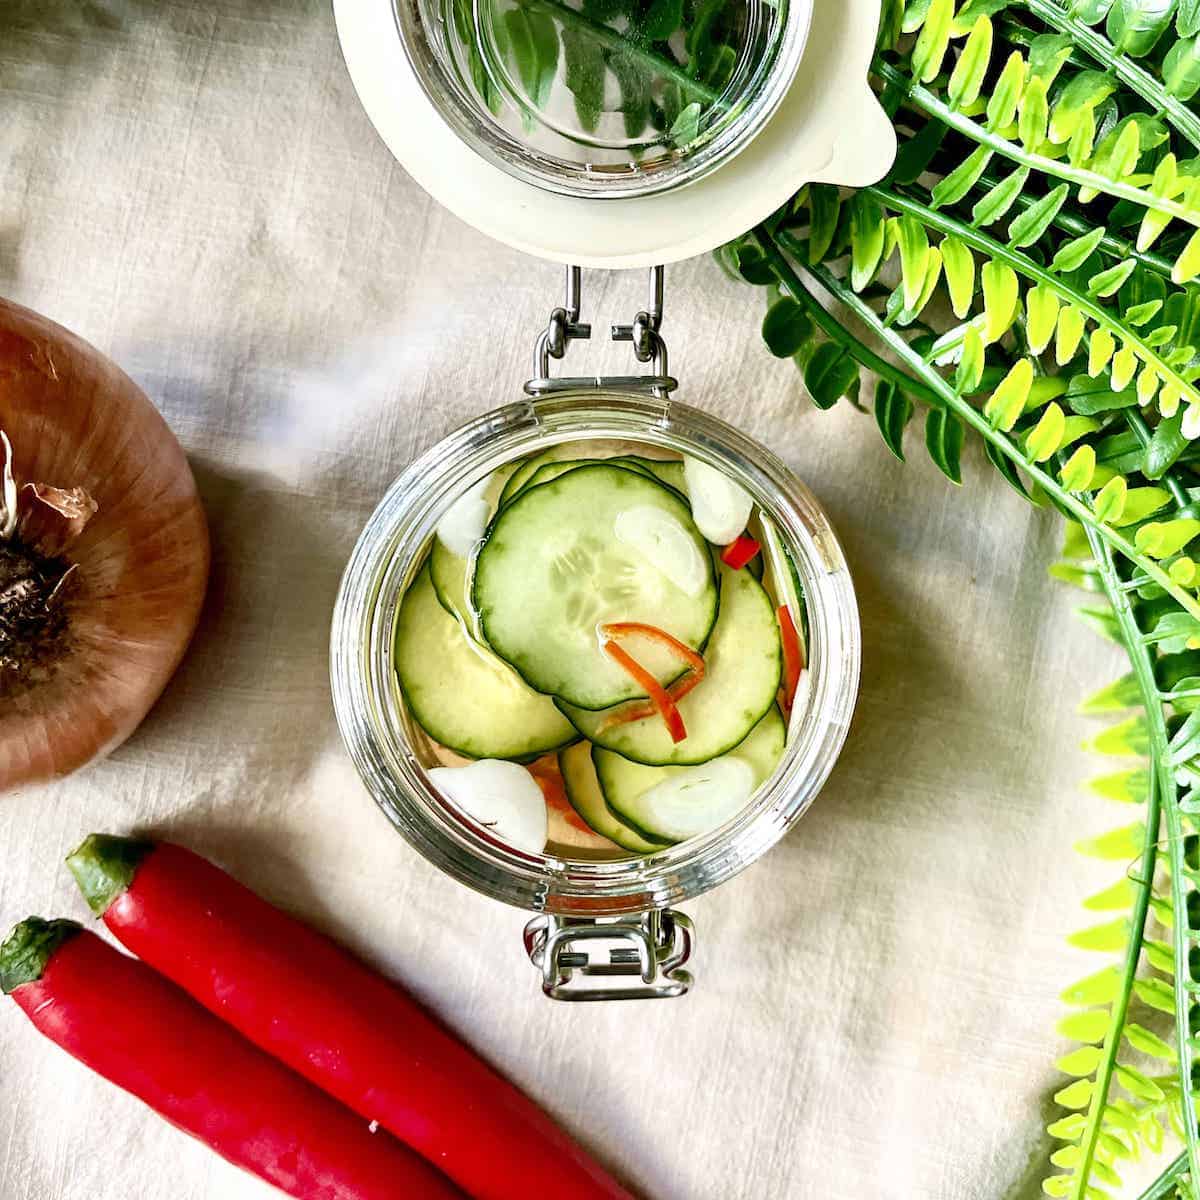 An open glass jar of fresh cucumber pickles with slivered red chili in it.